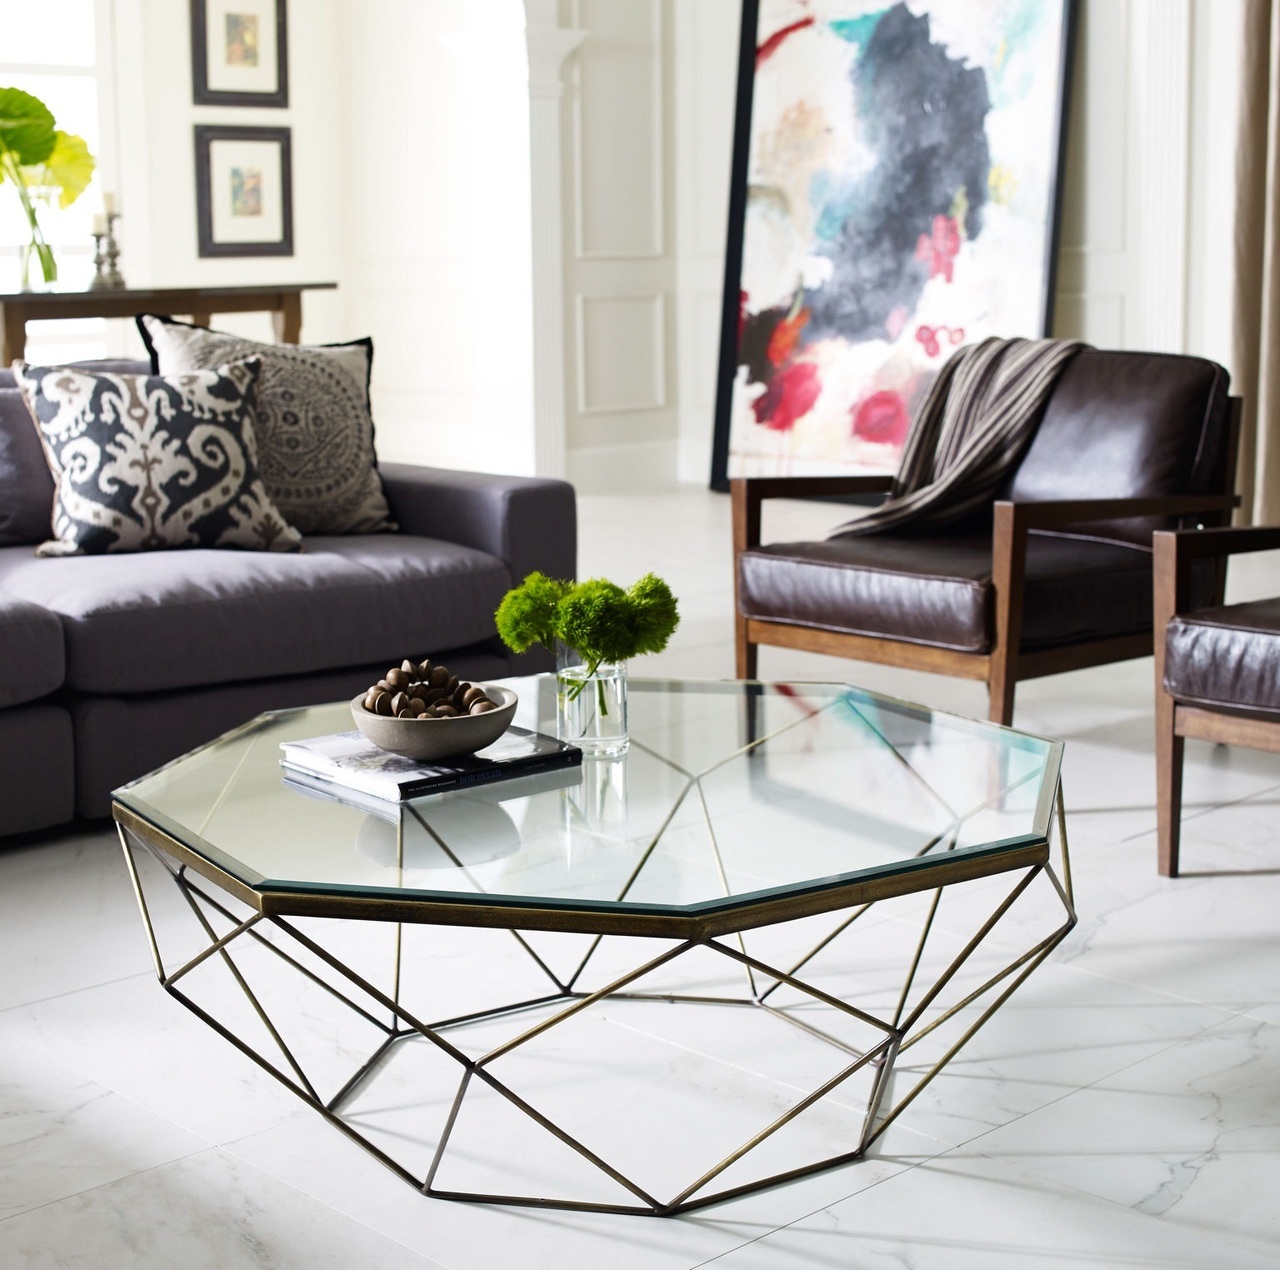 30 Glass Coffee Tables That Bring, Modern Side Tables For Living Room Uk London